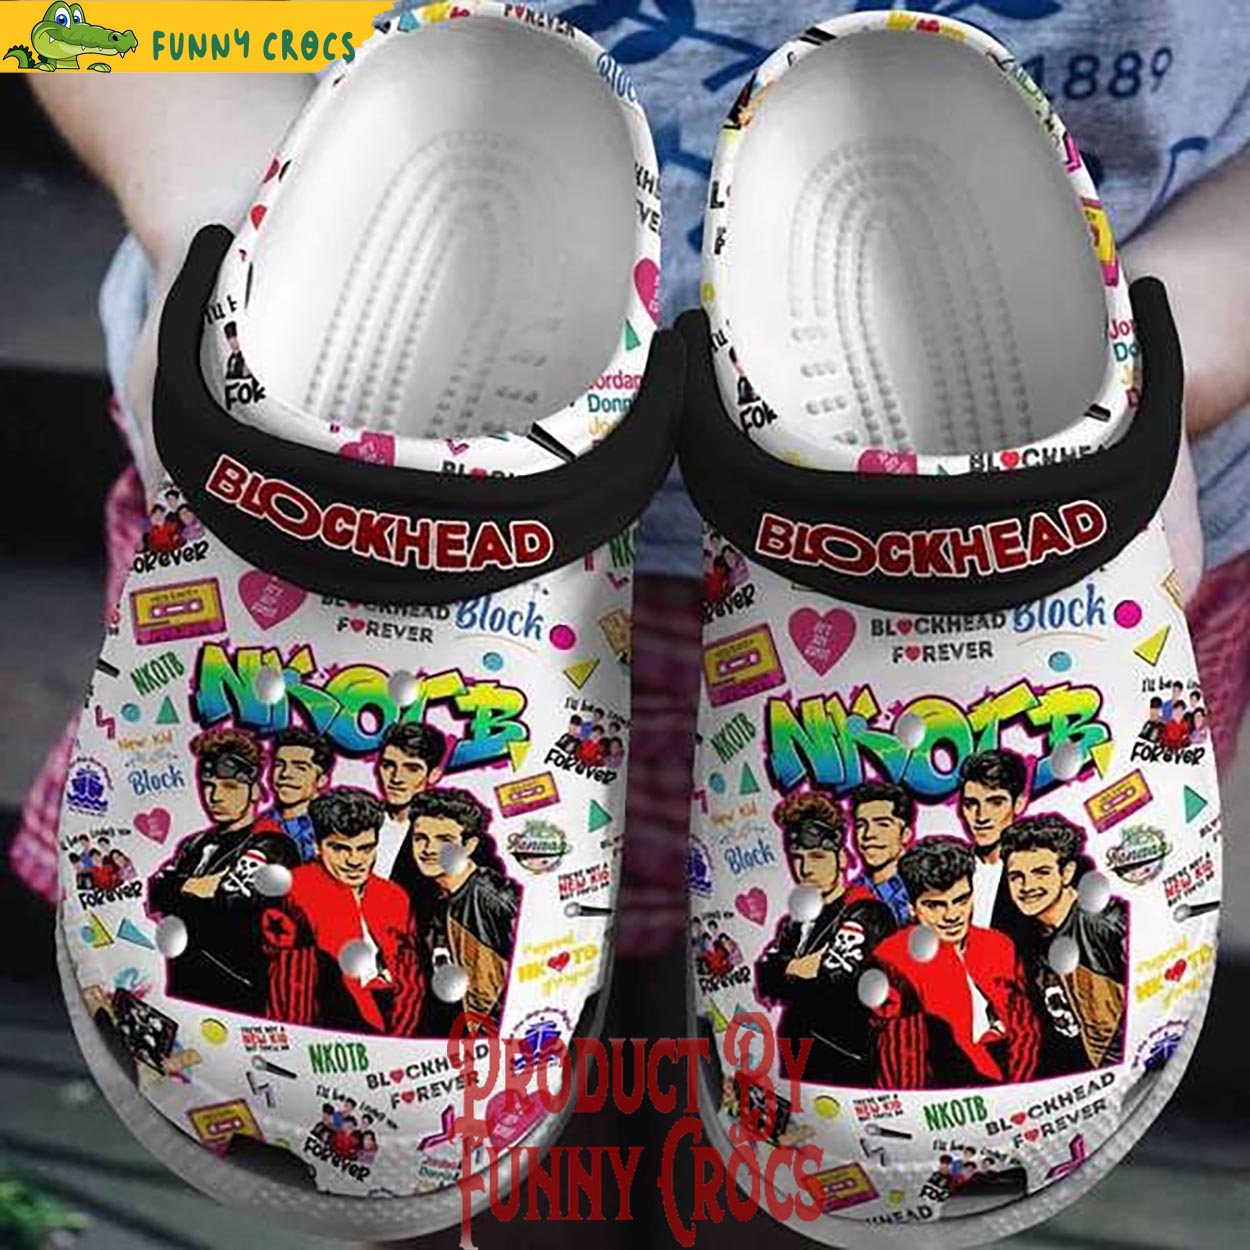 Blocked Head New Kid On The Block Crocs Shoes - Discover Comfort And ...